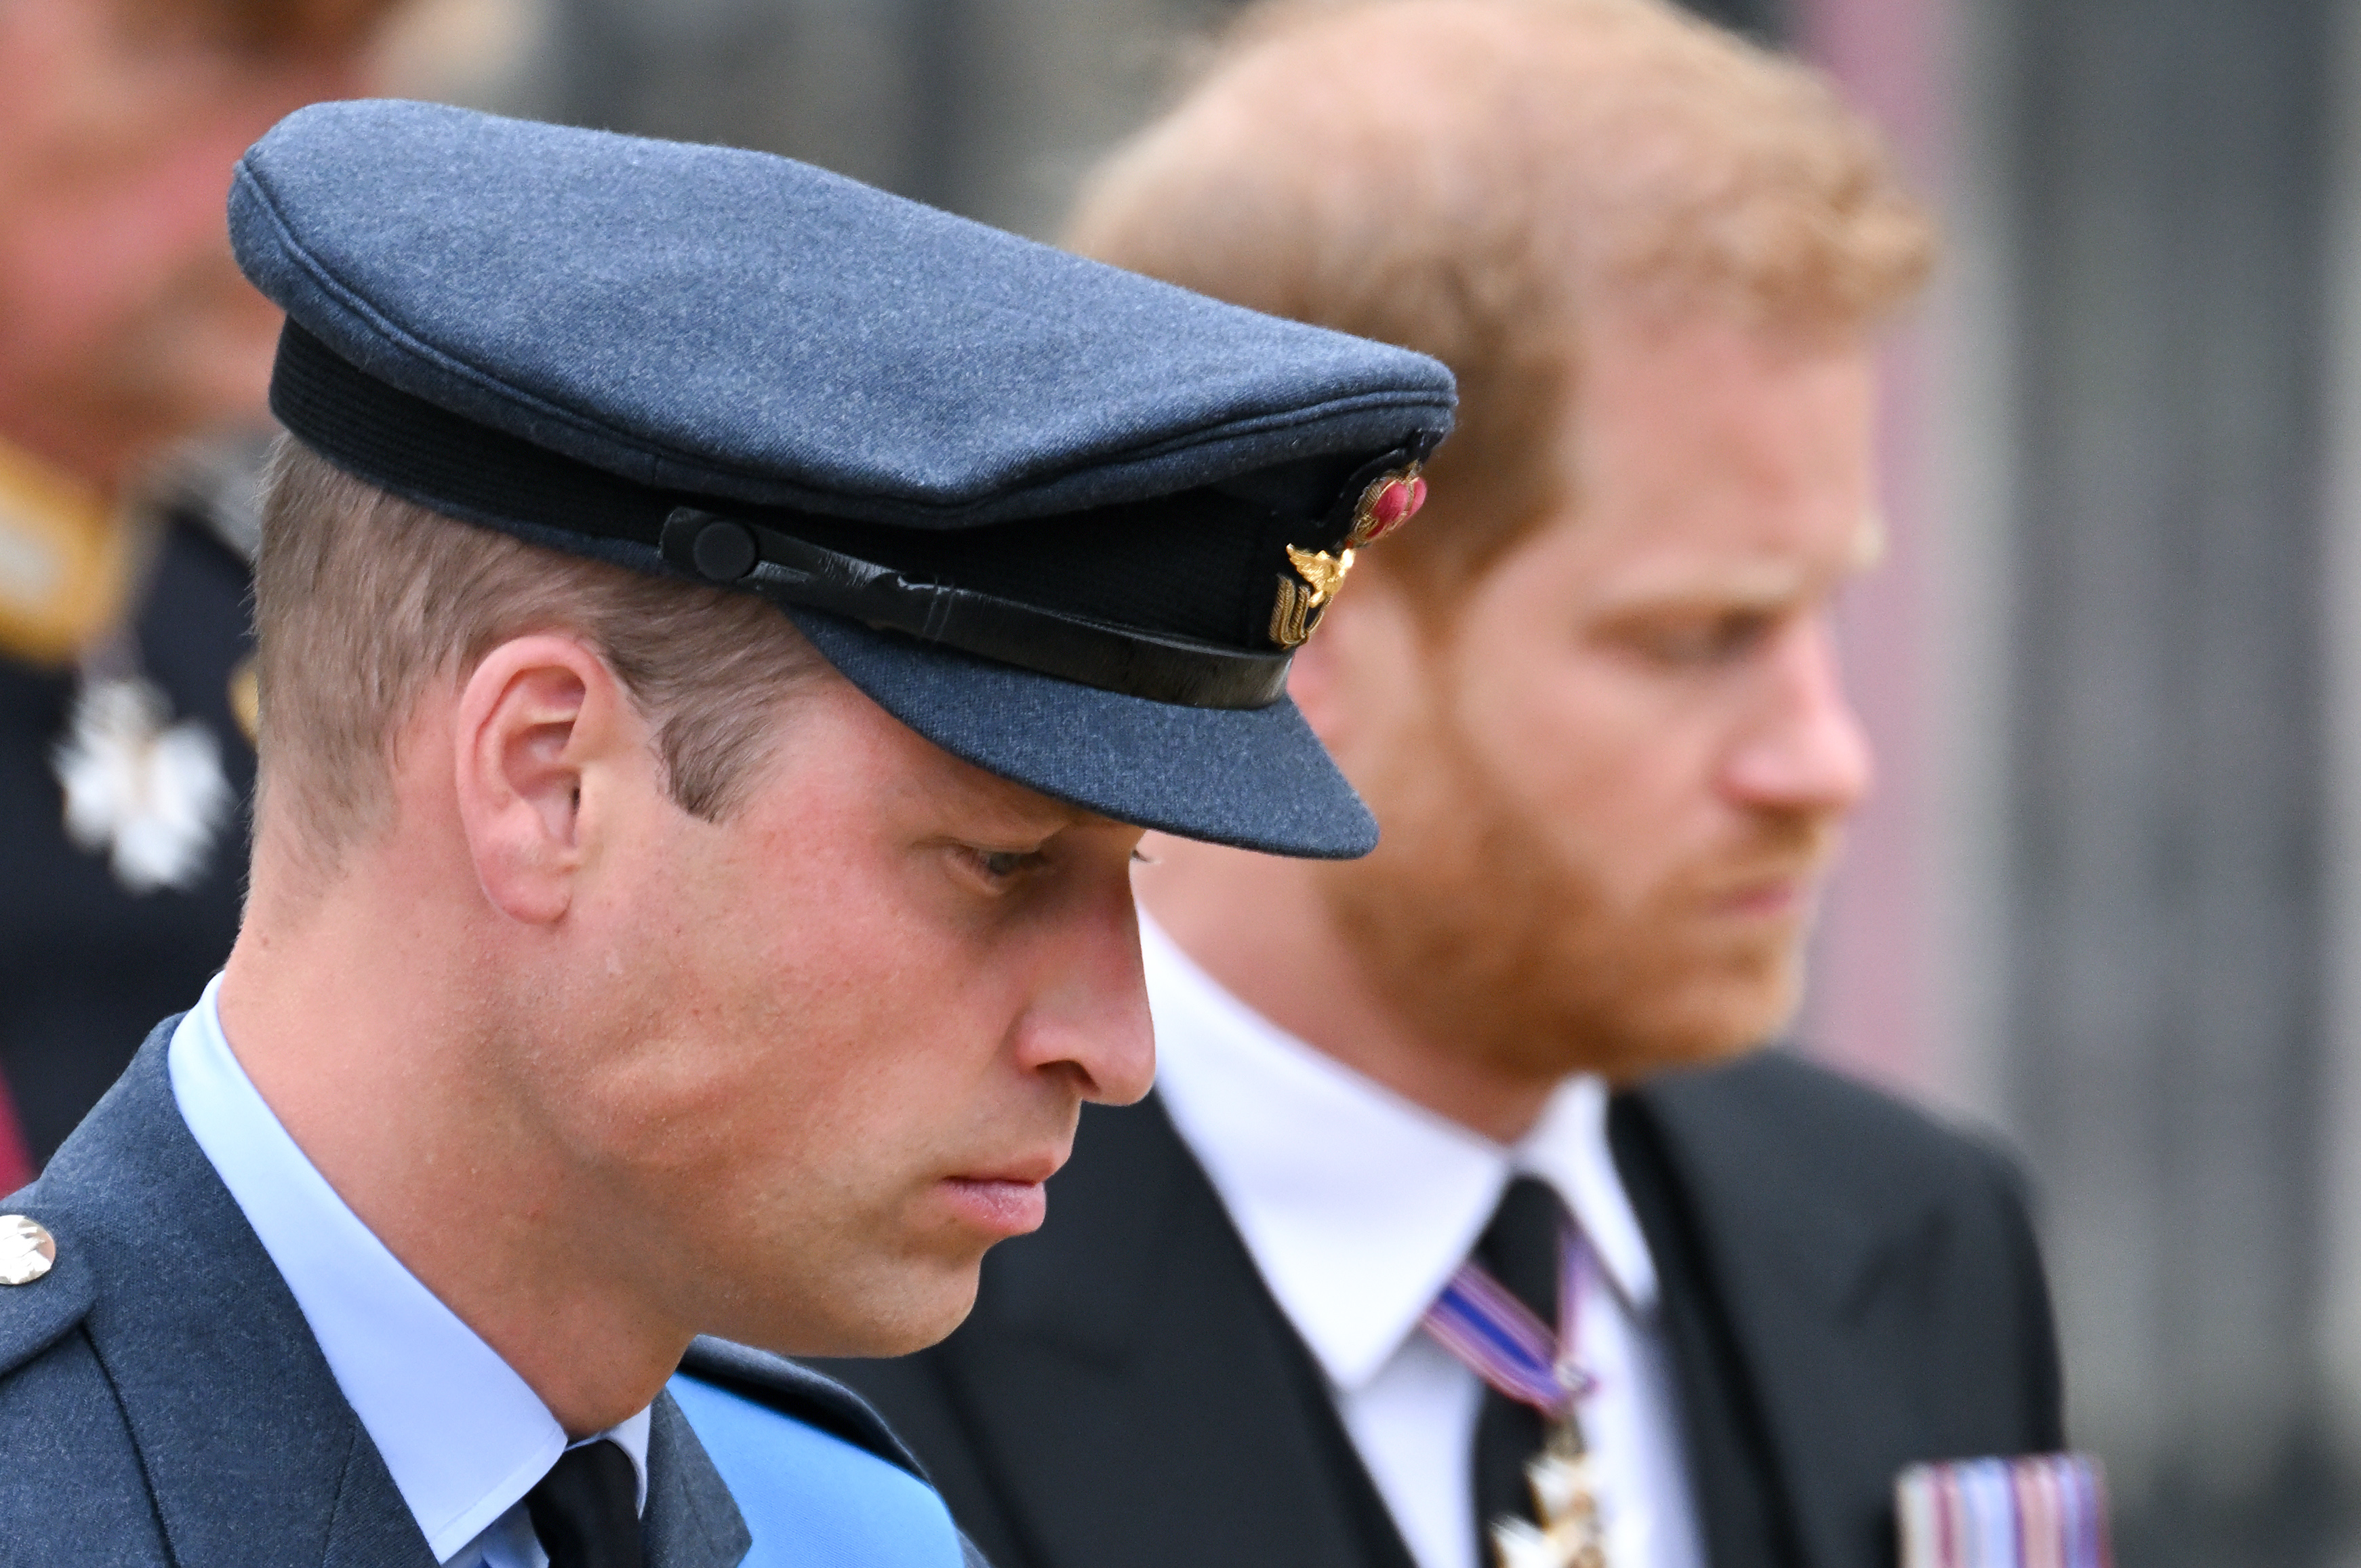 Prince William and Prince Harry at the State Funeral of Queen Elizabeth II in London, England on September 19, 2022 | Source: Getty Images